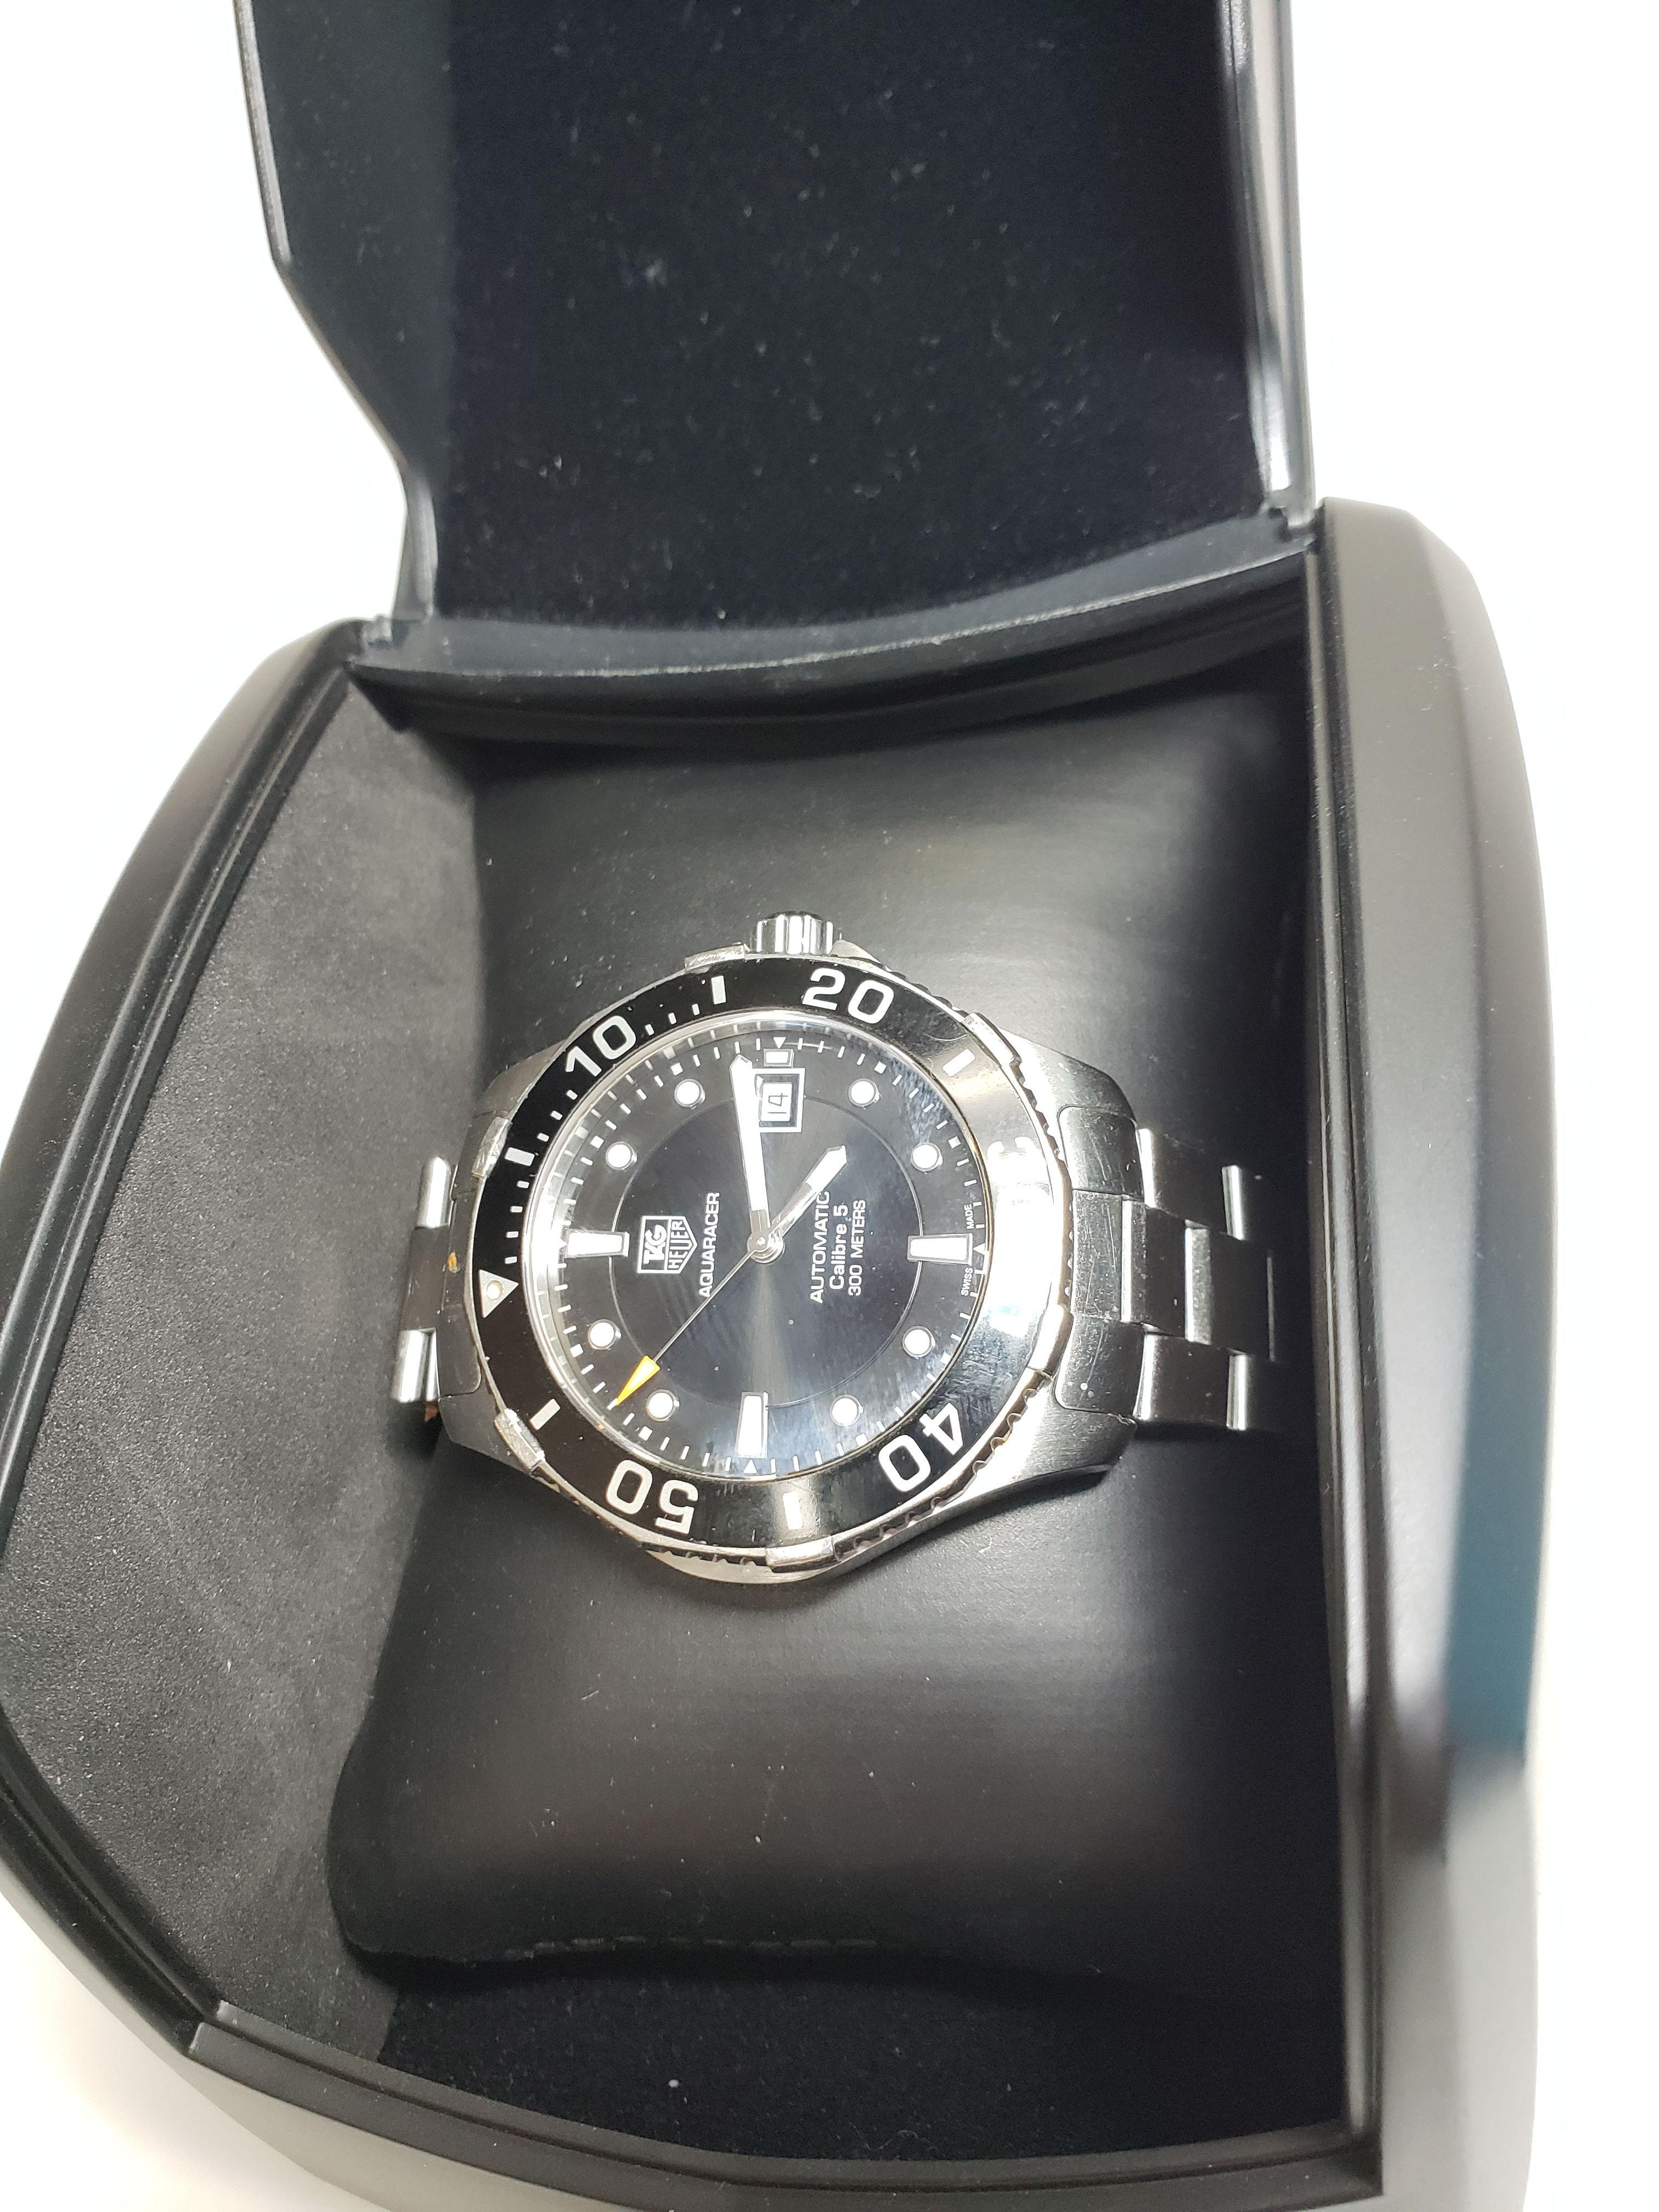 Mens Tag Heuer Automatic Calibre 5 Black Submariner St Steel Watch